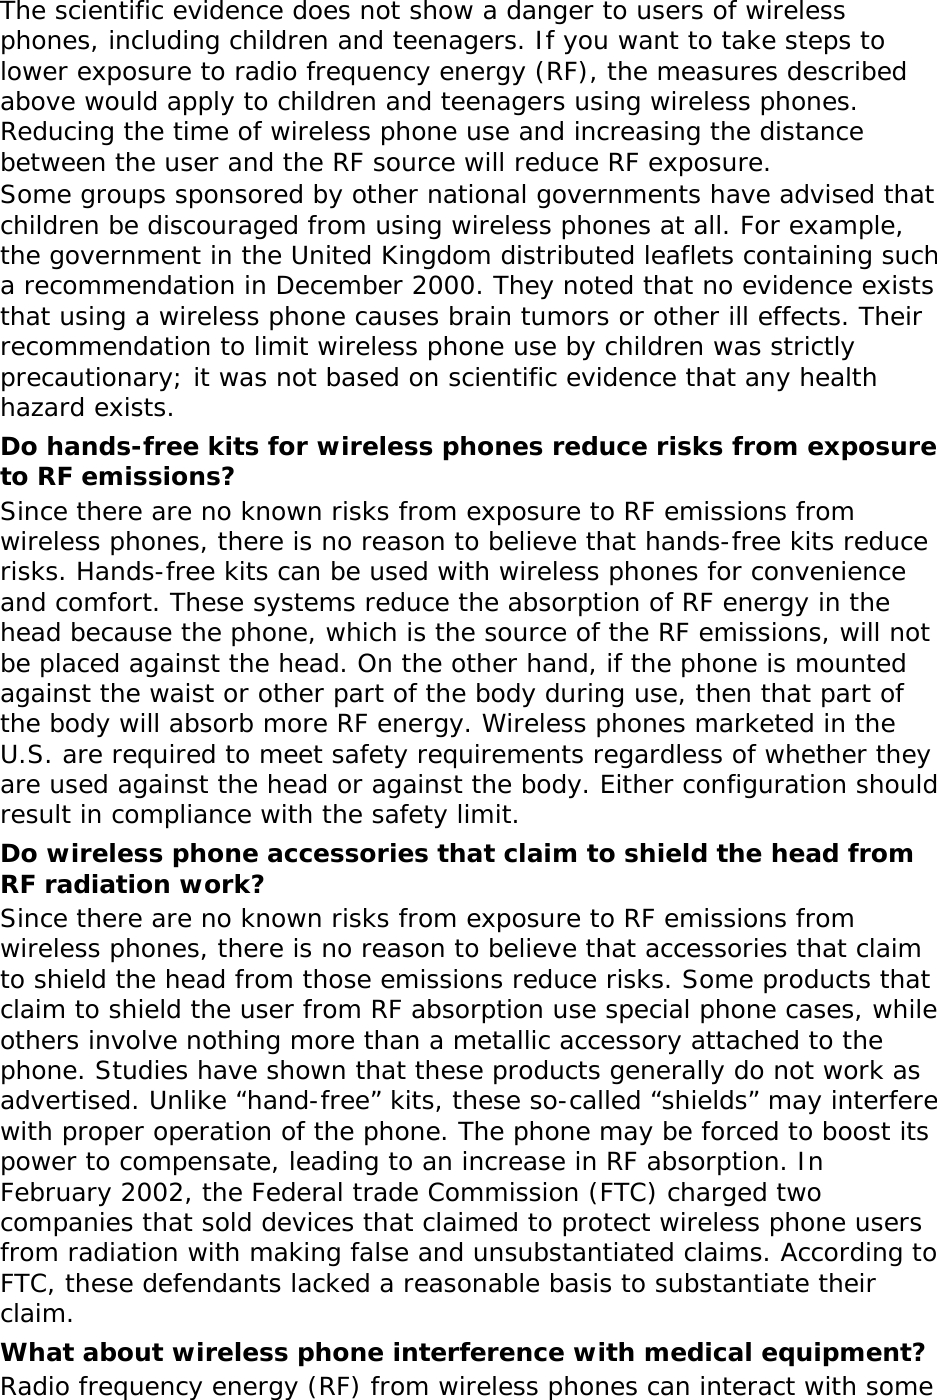 The scientific evidence does not show a danger to users of wireless phones, including children and teenagers. If you want to take steps to lower exposure to radio frequency energy (RF), the measures described above would apply to children and teenagers using wireless phones. Reducing the time of wireless phone use and increasing the distance between the user and the RF source will reduce RF exposure. Some groups sponsored by other national governments have advised that children be discouraged from using wireless phones at all. For example, the government in the United Kingdom distributed leaflets containing such a recommendation in December 2000. They noted that no evidence exists that using a wireless phone causes brain tumors or other ill effects. Their recommendation to limit wireless phone use by children was strictly precautionary; it was not based on scientific evidence that any health hazard exists.  Do hands-free kits for wireless phones reduce risks from exposure to RF emissions? Since there are no known risks from exposure to RF emissions from wireless phones, there is no reason to believe that hands-free kits reduce risks. Hands-free kits can be used with wireless phones for convenience and comfort. These systems reduce the absorption of RF energy in the head because the phone, which is the source of the RF emissions, will not be placed against the head. On the other hand, if the phone is mounted against the waist or other part of the body during use, then that part of the body will absorb more RF energy. Wireless phones marketed in the U.S. are required to meet safety requirements regardless of whether they are used against the head or against the body. Either configuration should result in compliance with the safety limit. Do wireless phone accessories that claim to shield the head from RF radiation work? Since there are no known risks from exposure to RF emissions from wireless phones, there is no reason to believe that accessories that claim to shield the head from those emissions reduce risks. Some products that claim to shield the user from RF absorption use special phone cases, while others involve nothing more than a metallic accessory attached to the phone. Studies have shown that these products generally do not work as advertised. Unlike “hand-free” kits, these so-called “shields” may interfere with proper operation of the phone. The phone may be forced to boost its power to compensate, leading to an increase in RF absorption. In February 2002, the Federal trade Commission (FTC) charged two companies that sold devices that claimed to protect wireless phone users from radiation with making false and unsubstantiated claims. According to FTC, these defendants lacked a reasonable basis to substantiate their claim. What about wireless phone interference with medical equipment? Radio frequency energy (RF) from wireless phones can interact with some 